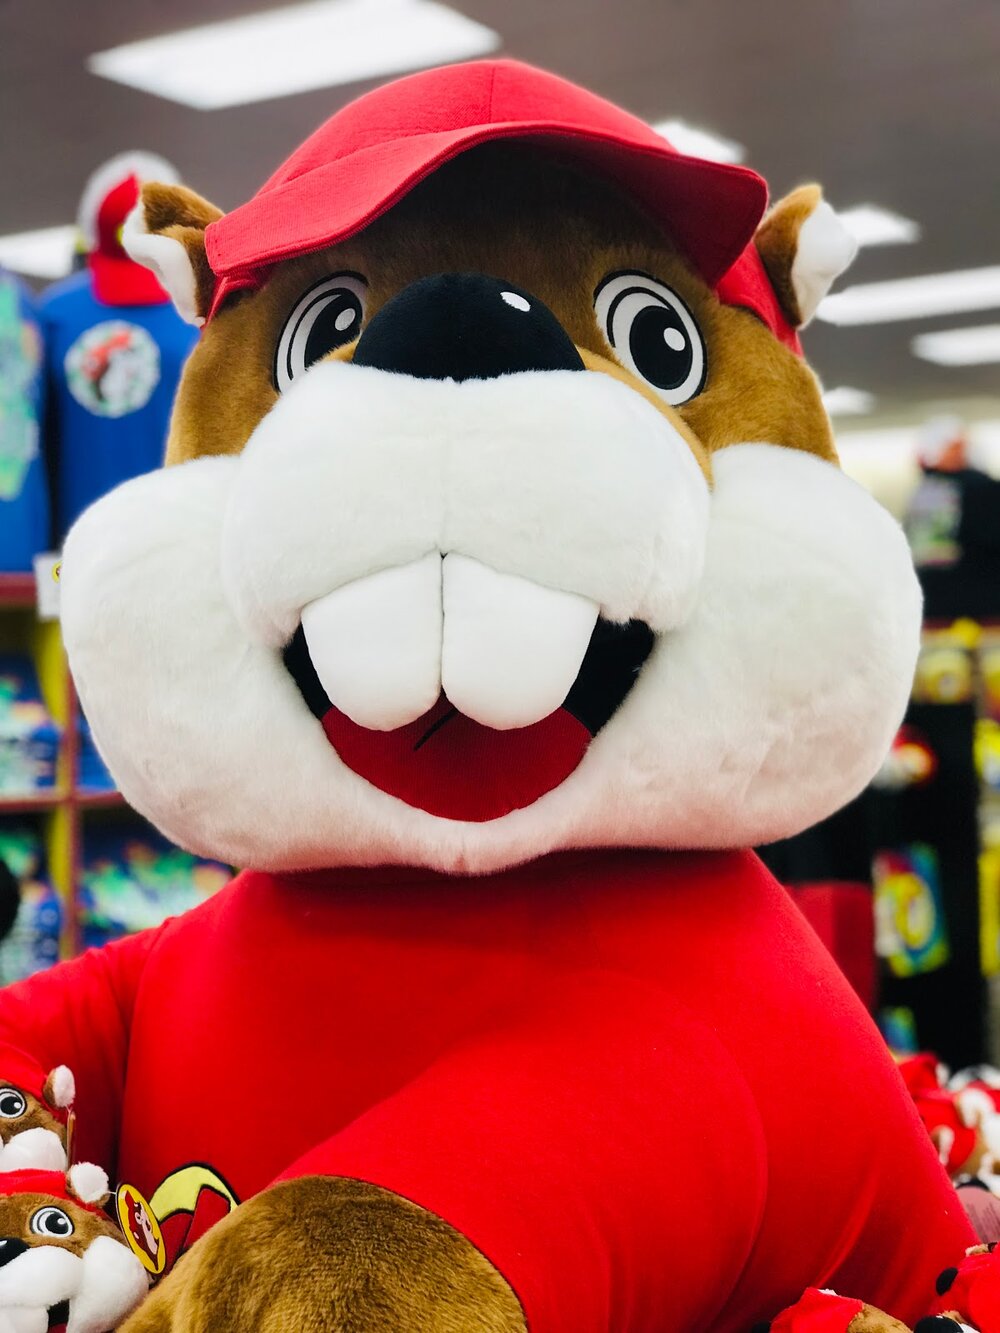 My FIRST Trip To Buc-ee's Beaver Store: Fun, Food, Shopping And A Good Ole' Time!